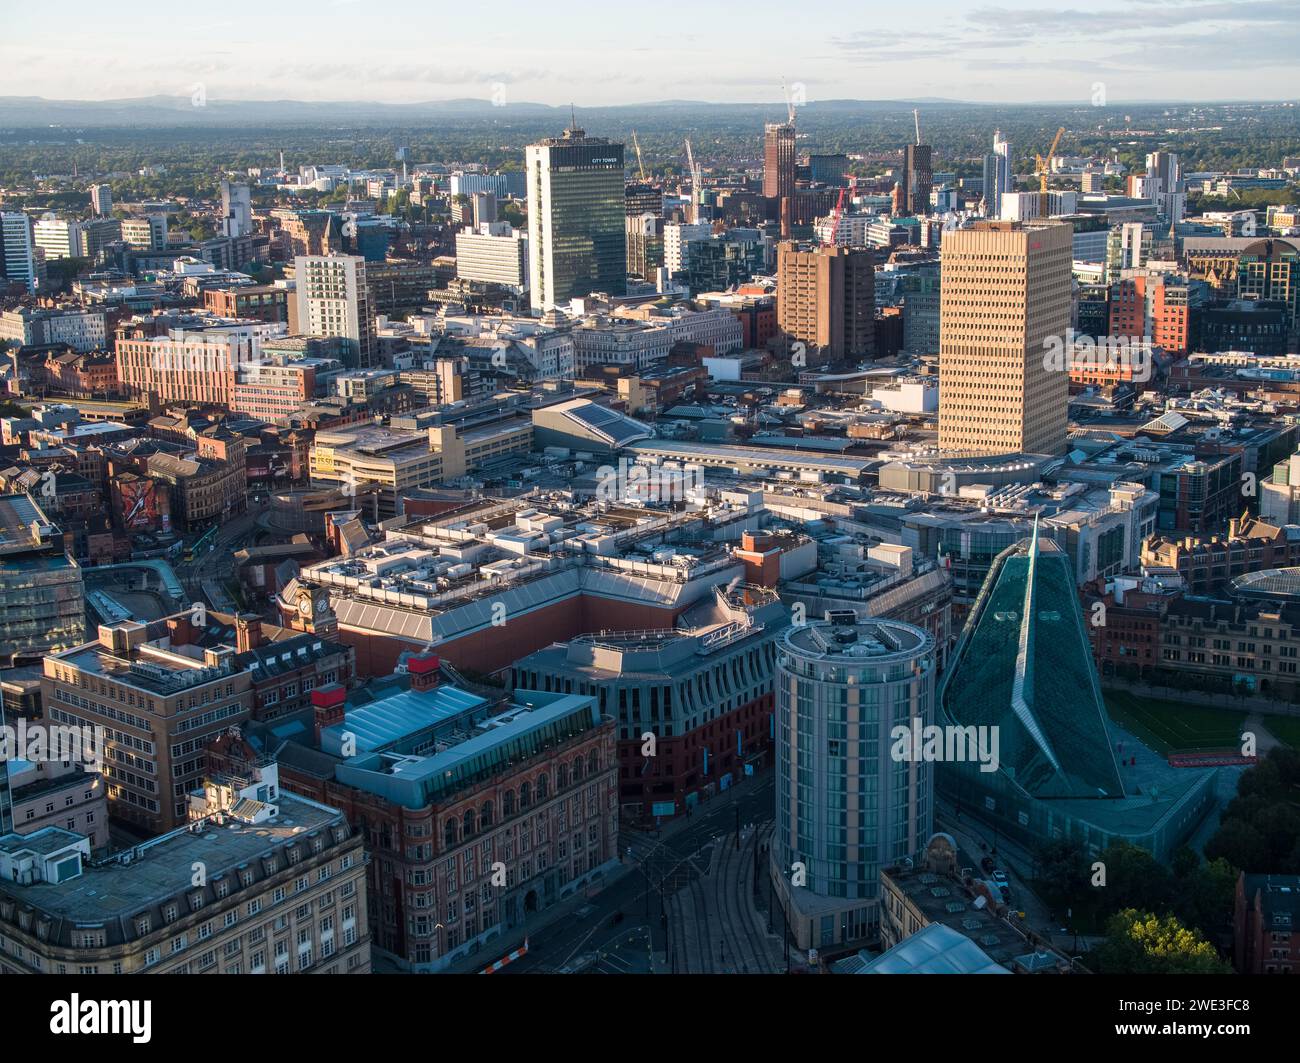 Aerial image of Indigo Hotel, National Football Museum at Urbis, Corn Exchange, Arndale House, City Tower, Bloc & the wider Manchester city centre, UK Stock Photo